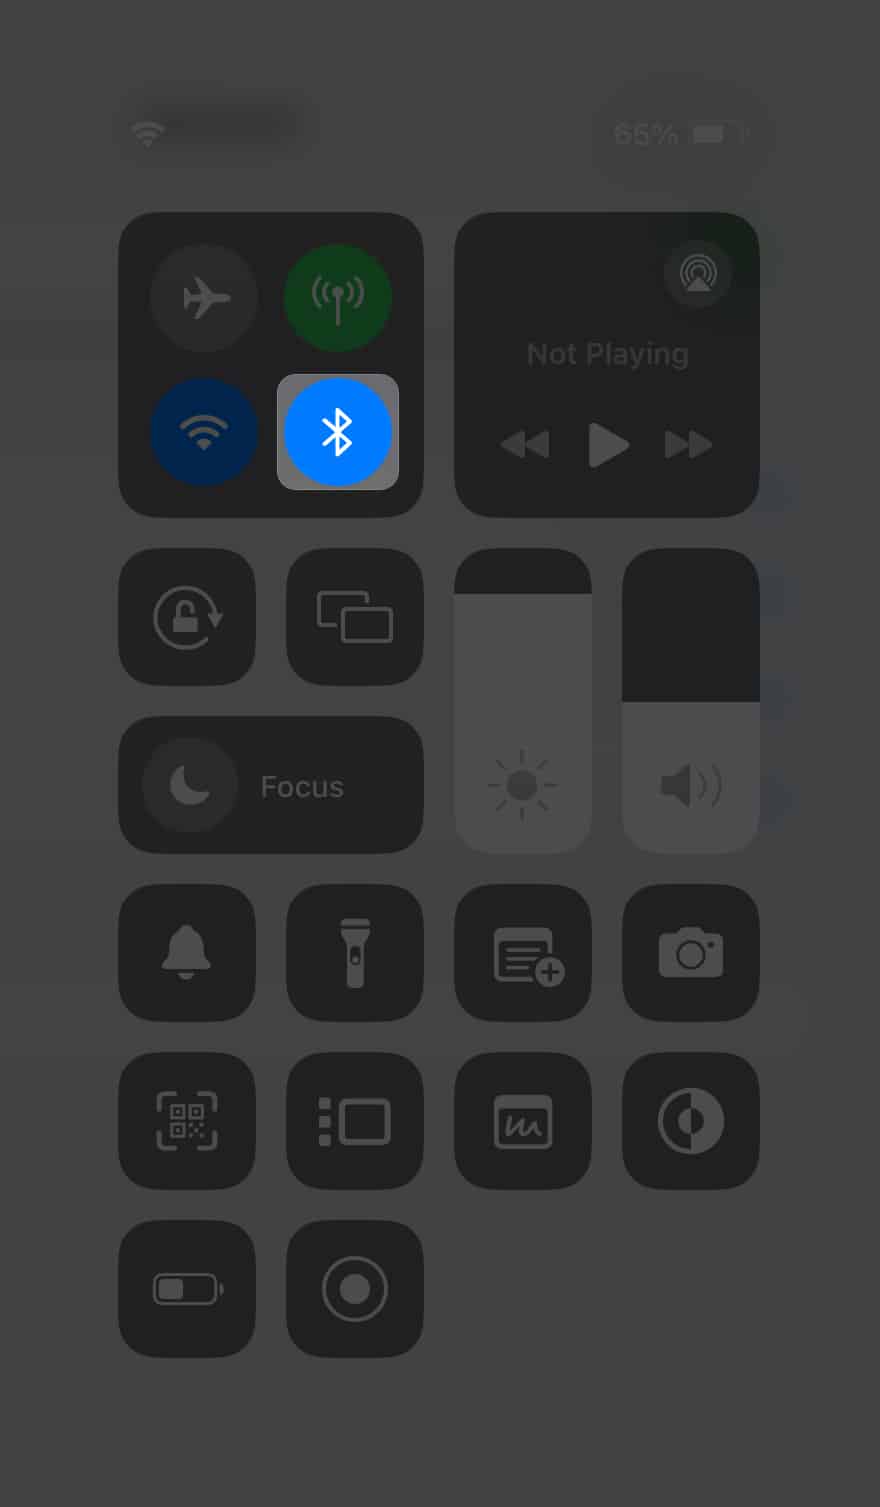 Enable Bluetooth from control center